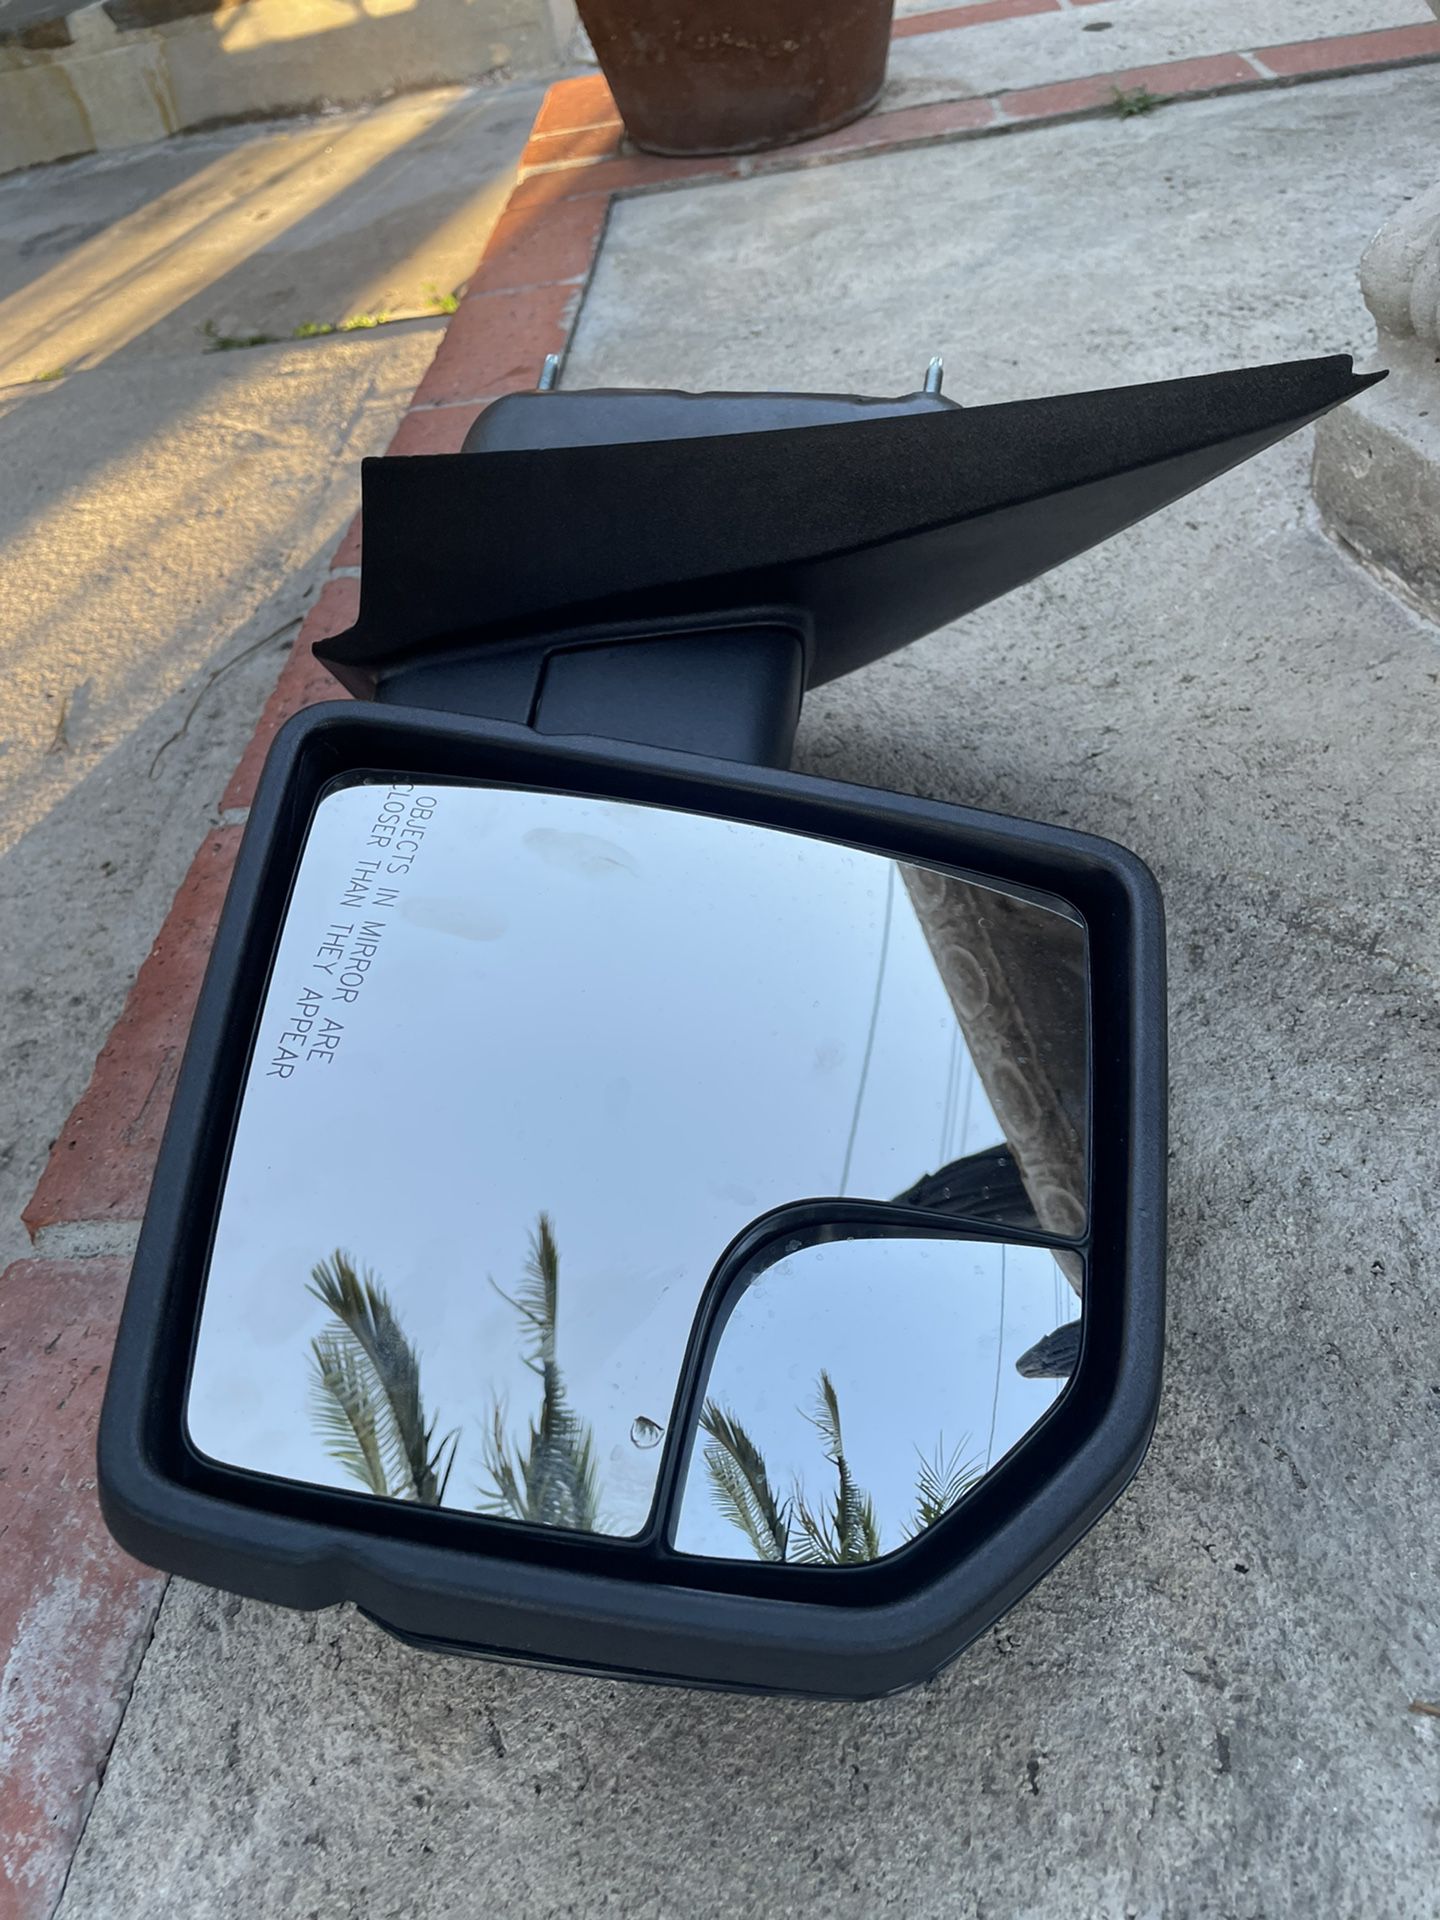 2018 F-150 Side View Mirrors